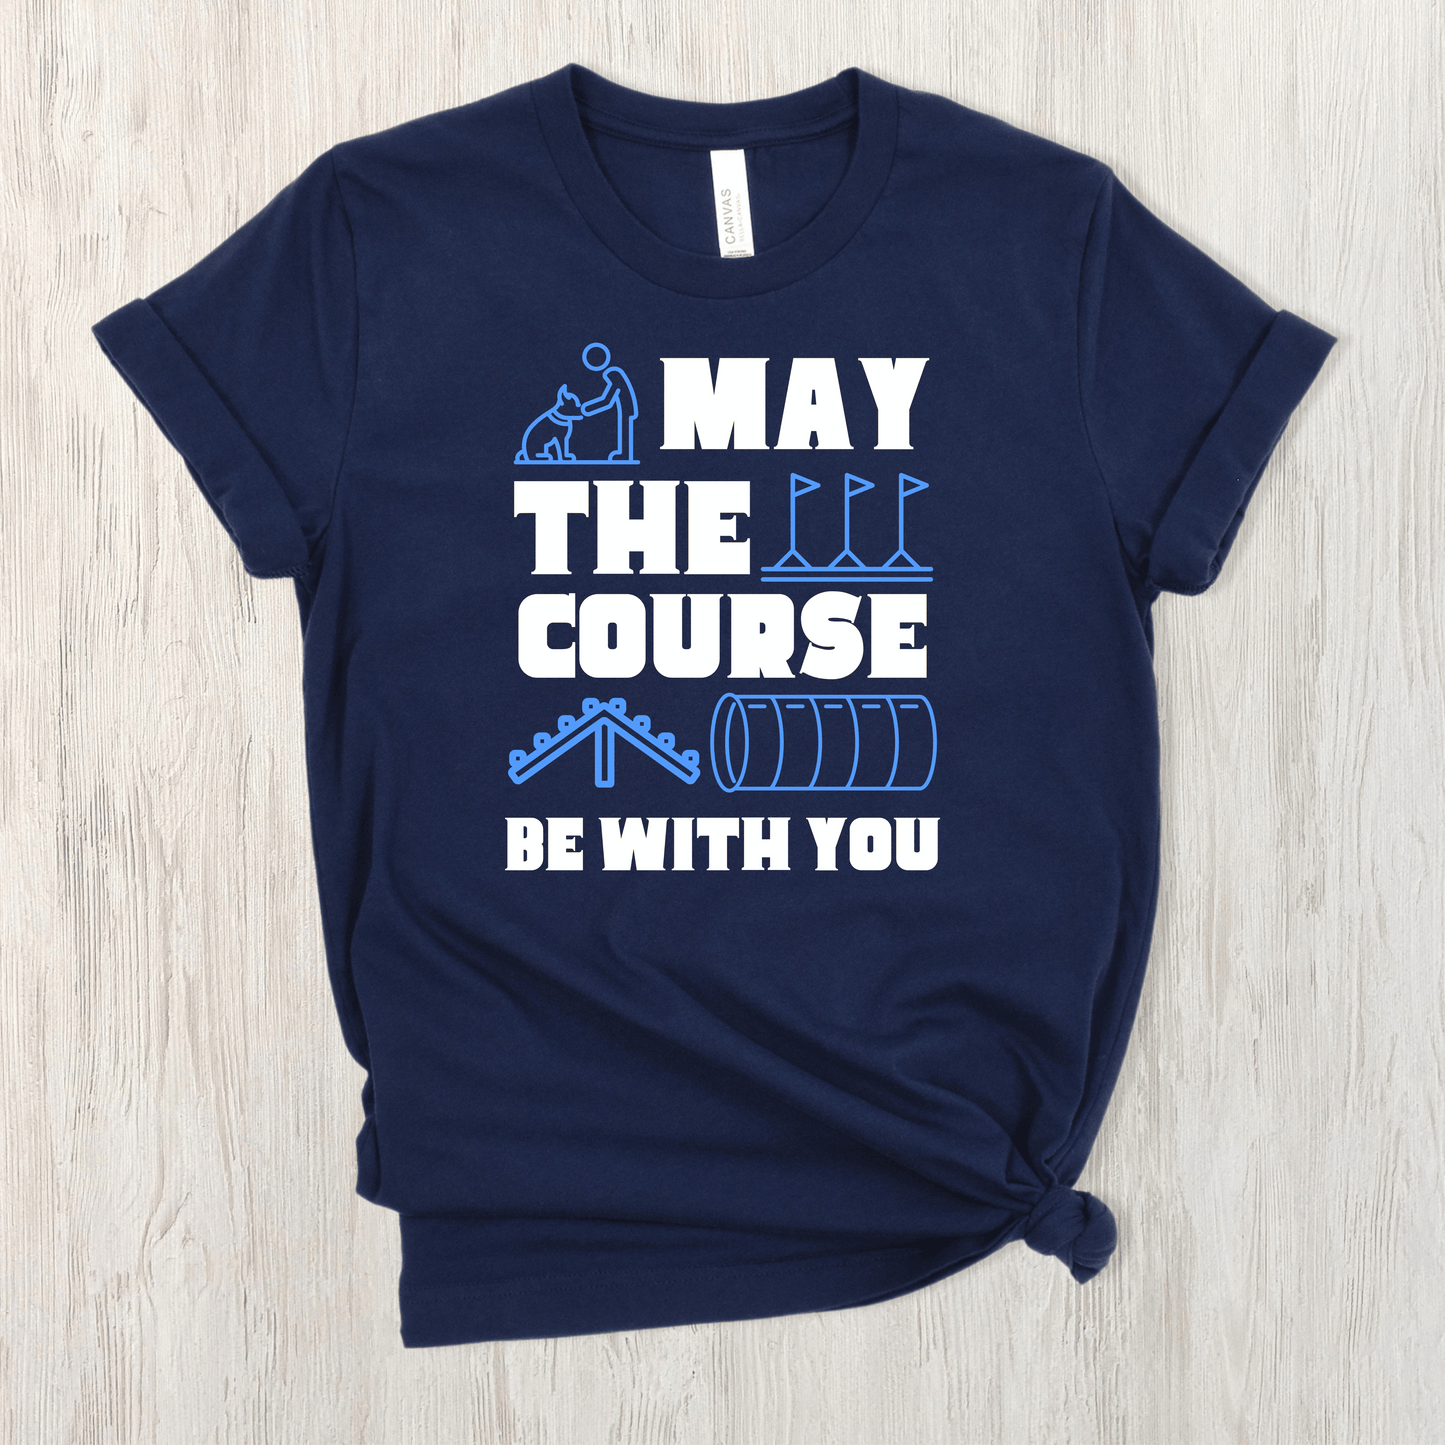 Navy tee featuring the text "May The Force Be With You" as well as agility related images.